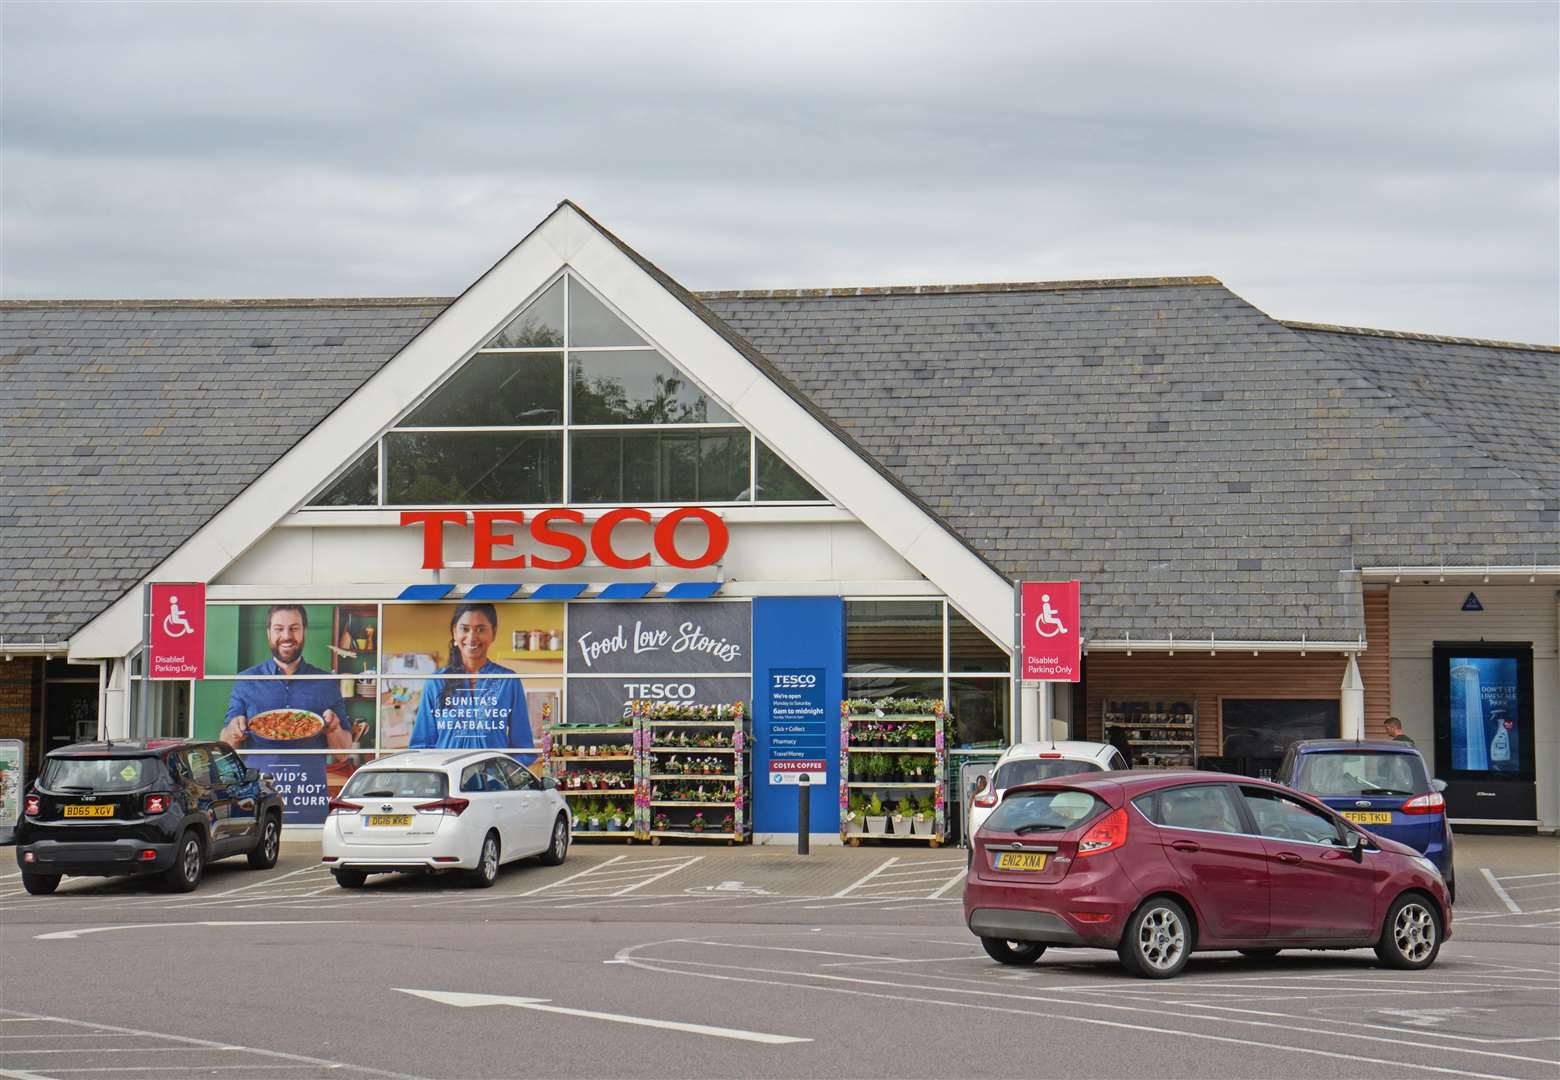 Tesco has provided some general opening hours for over the festive period